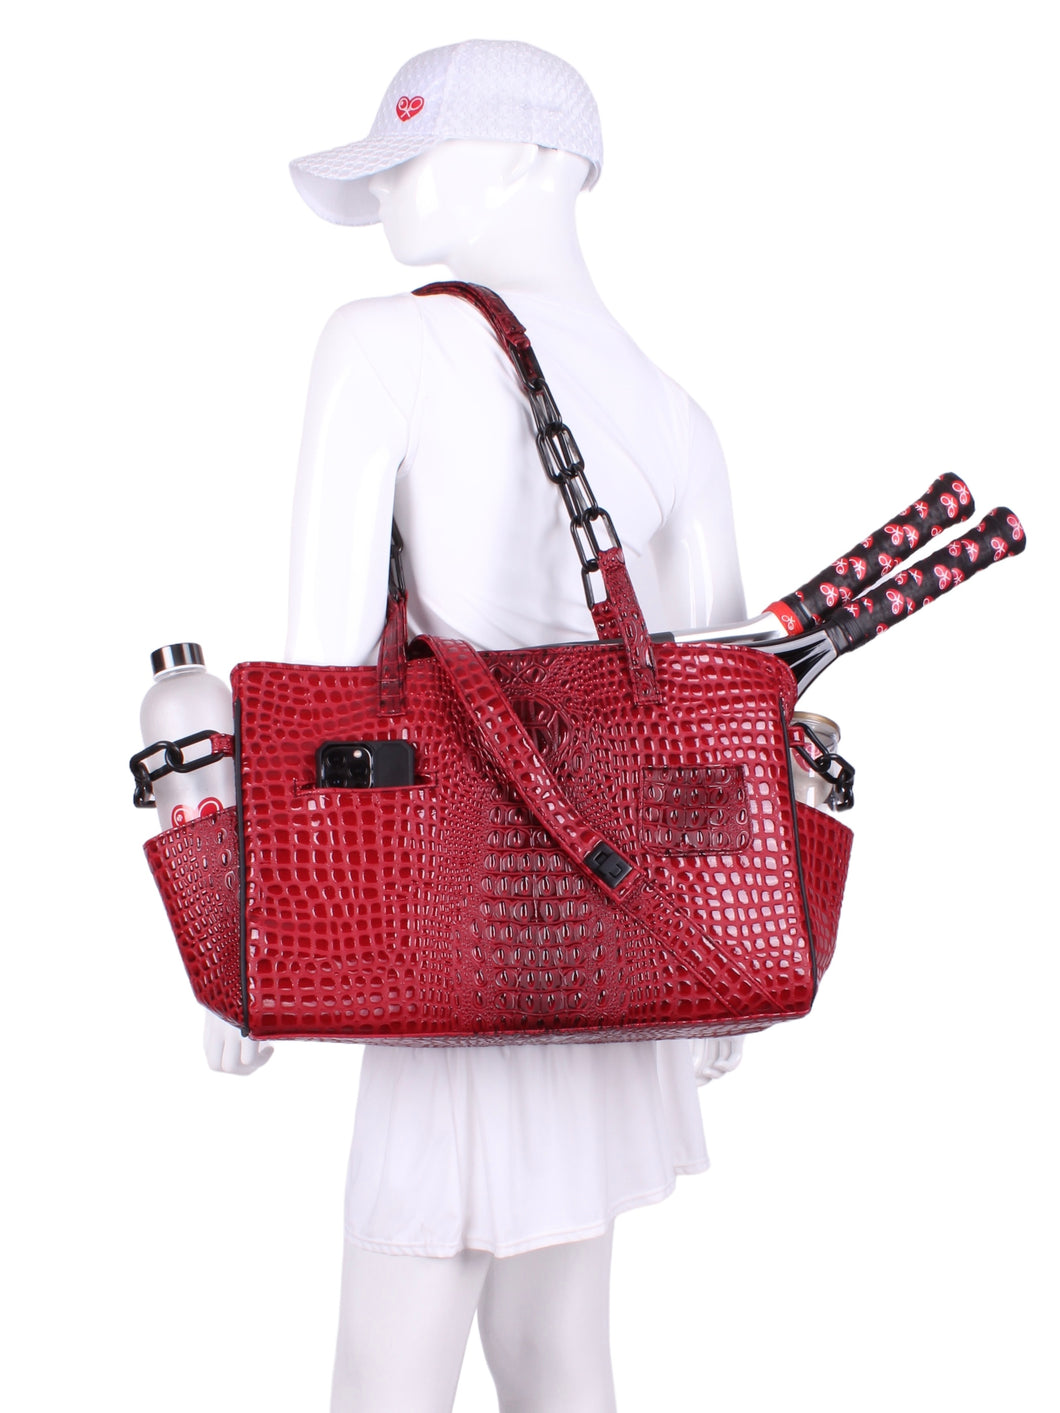 The Long Tennis Tote in Burgundy Vegan Alligator is our stylish, sexy and functional tennis bag designed to carry all your essentials for the game. 